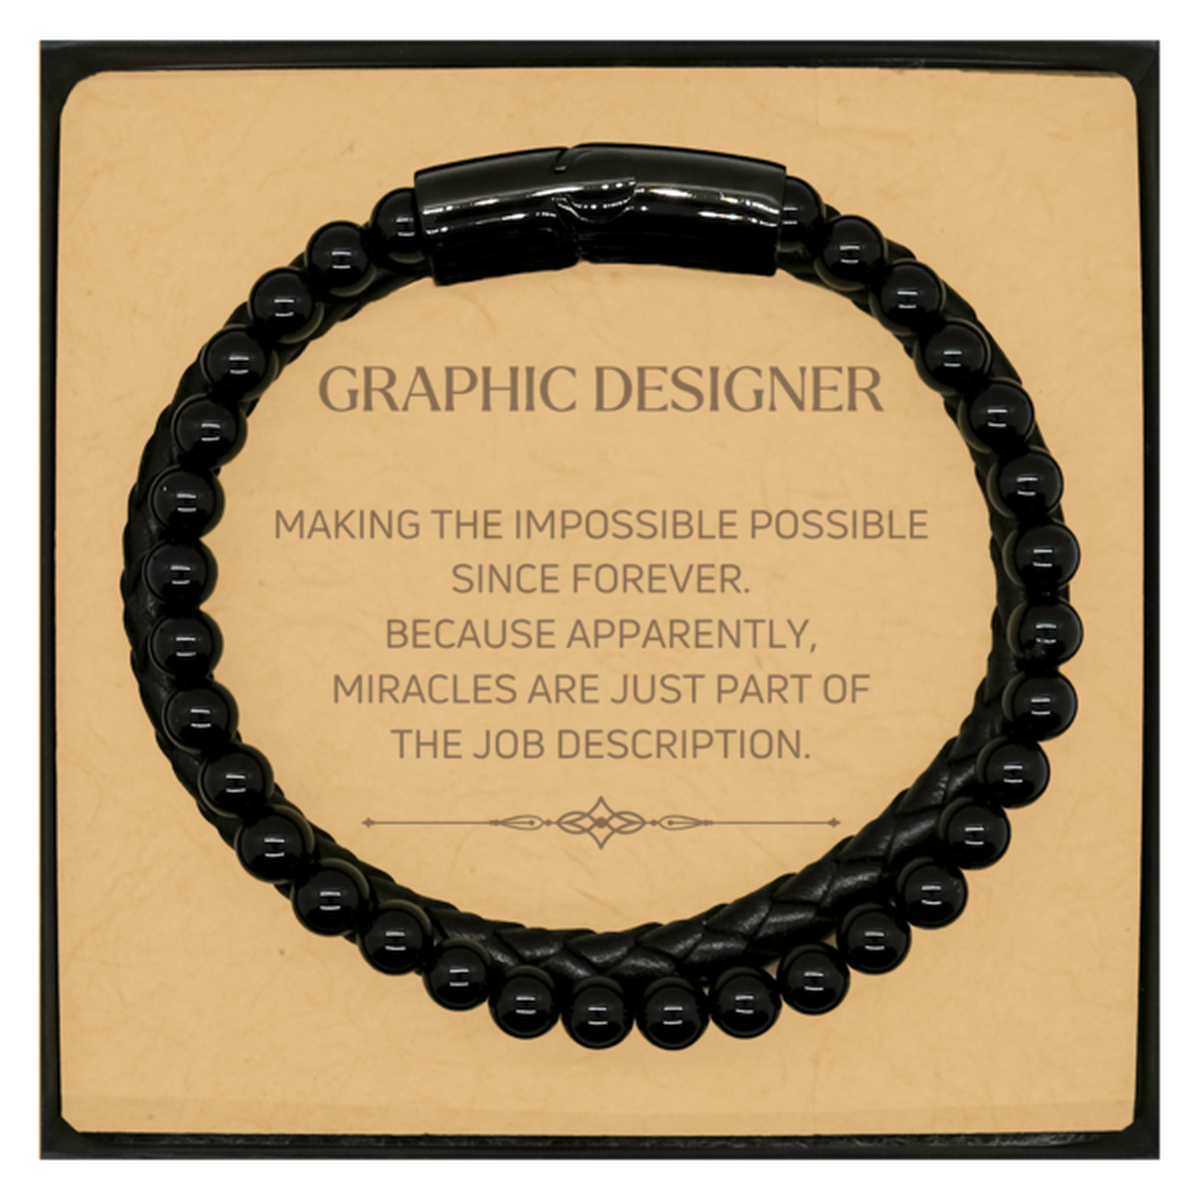 Funny Graphic Designer Gifts, Miracles are just part of the job description, Inspirational Birthday Christmas Stone Leather Bracelets For Graphic Designer, Men, Women, Coworkers, Friends, Boss